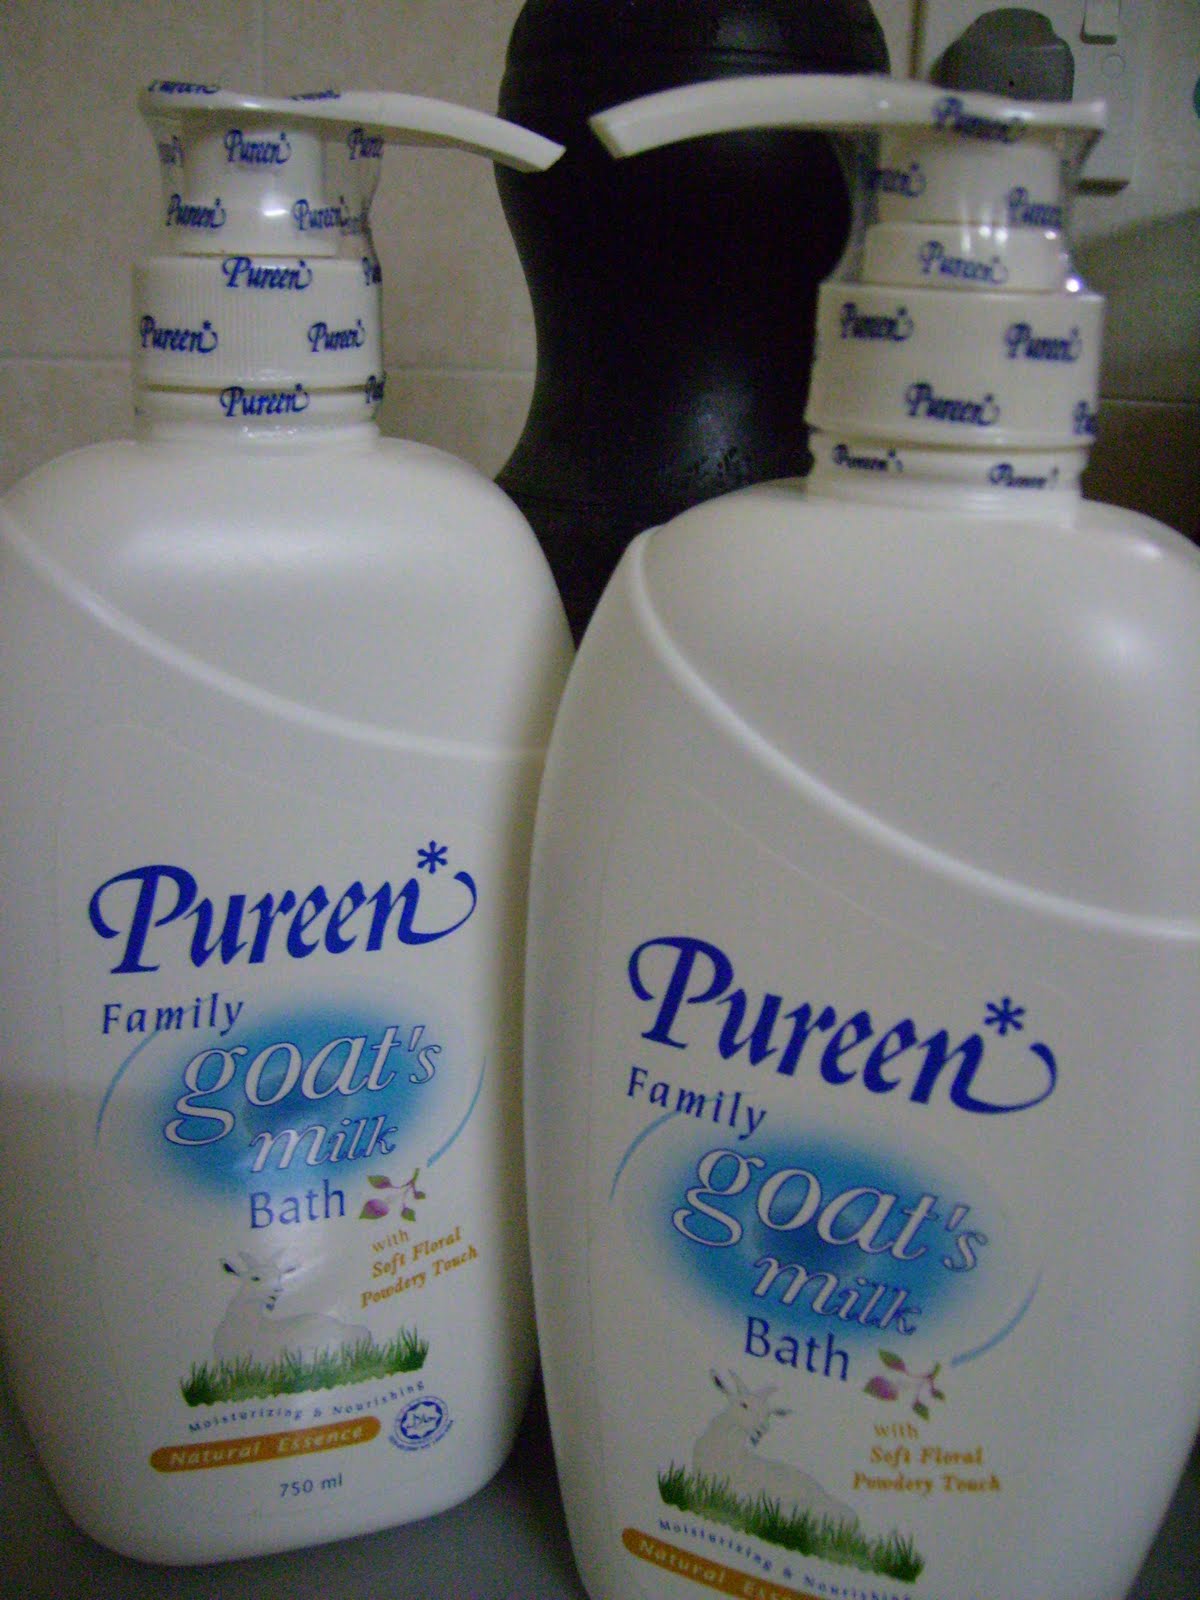 My Beloved Family: @ Pureen Stock Clearance Sale!